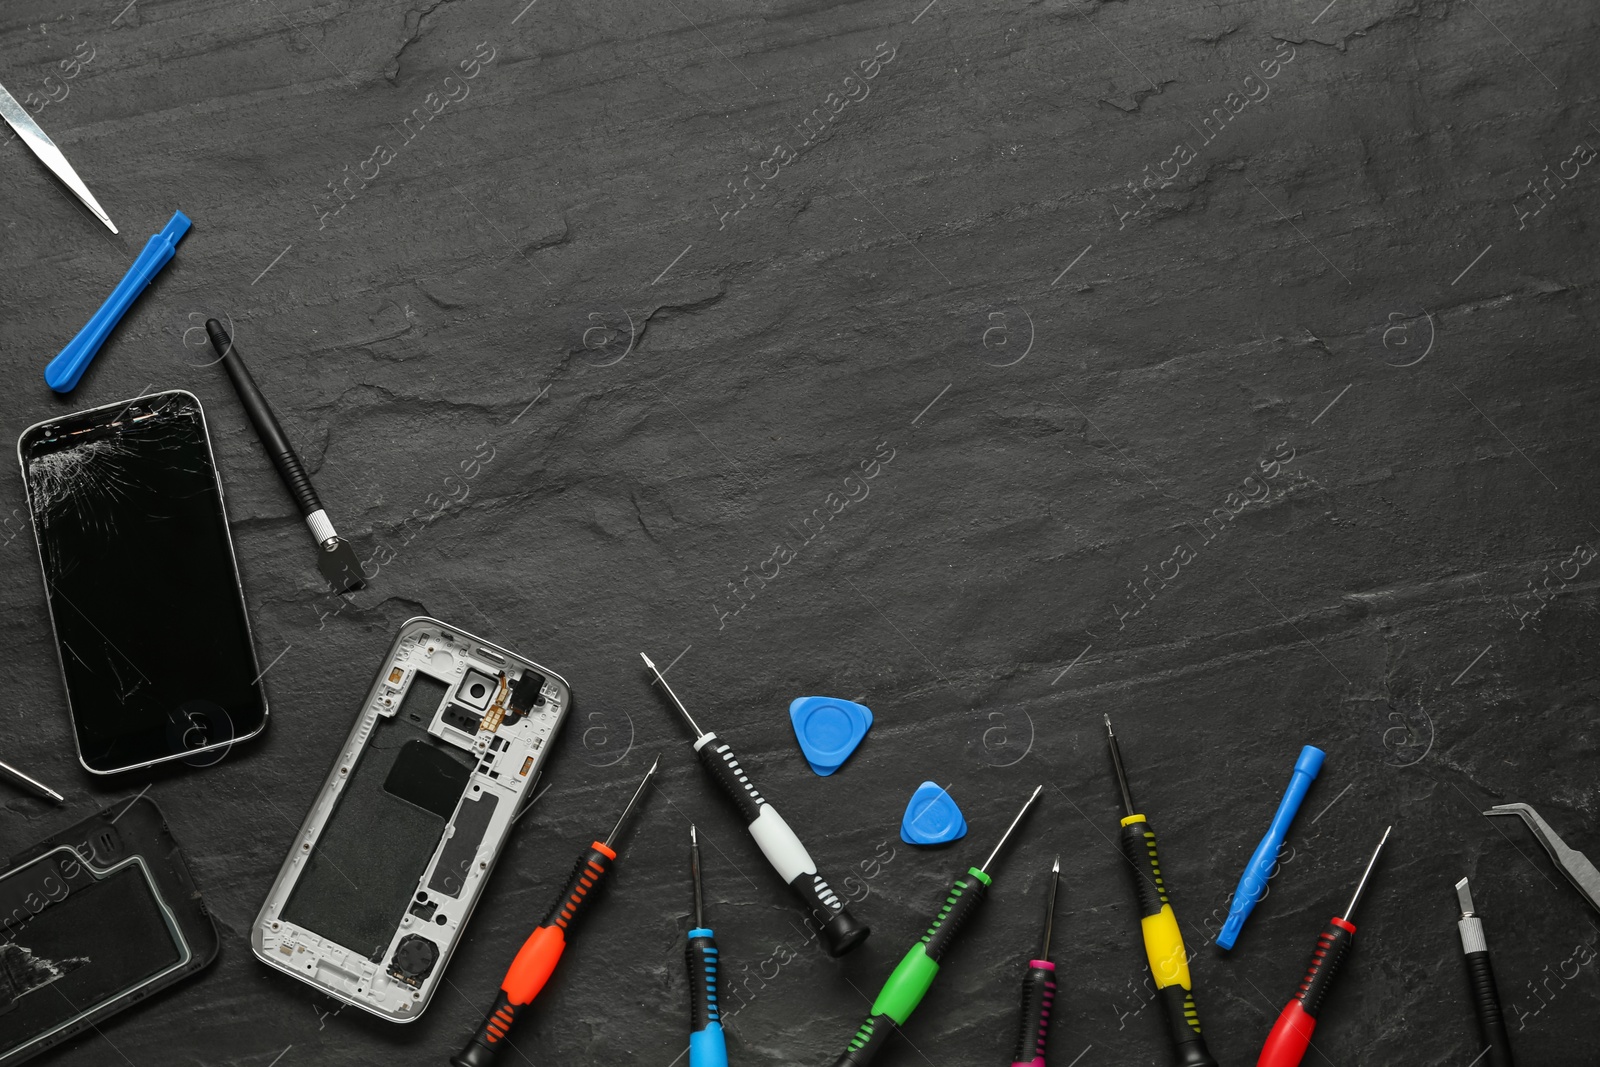 Photo of Damaged smartphone and repair tools on black background, flat lay. Space for text